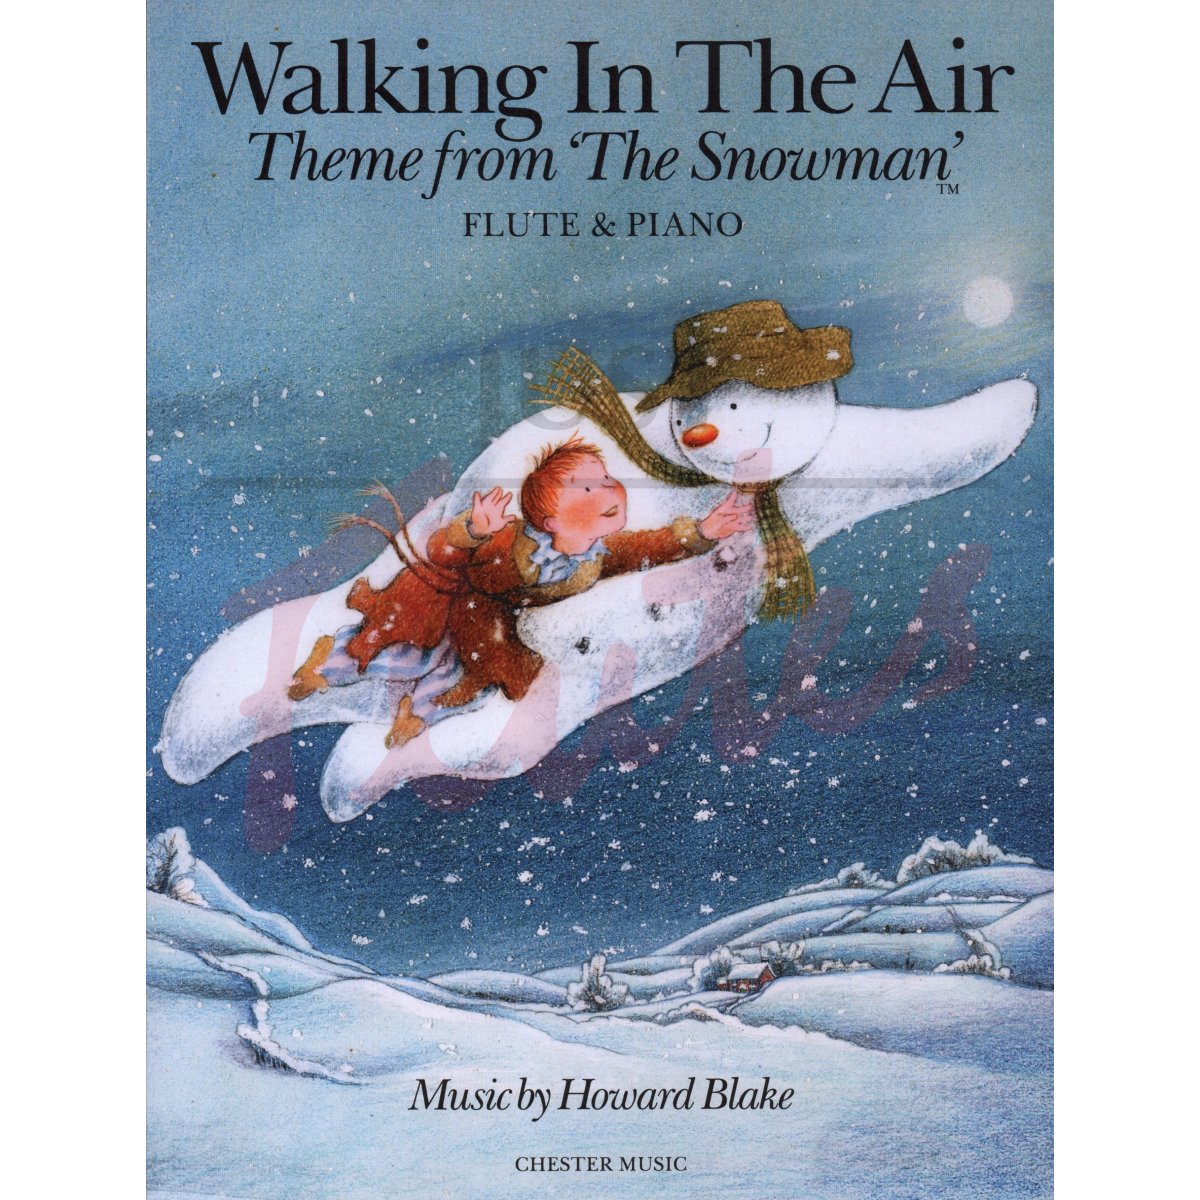 Walking in the Air: Theme from the Snowman for Flute and Piano